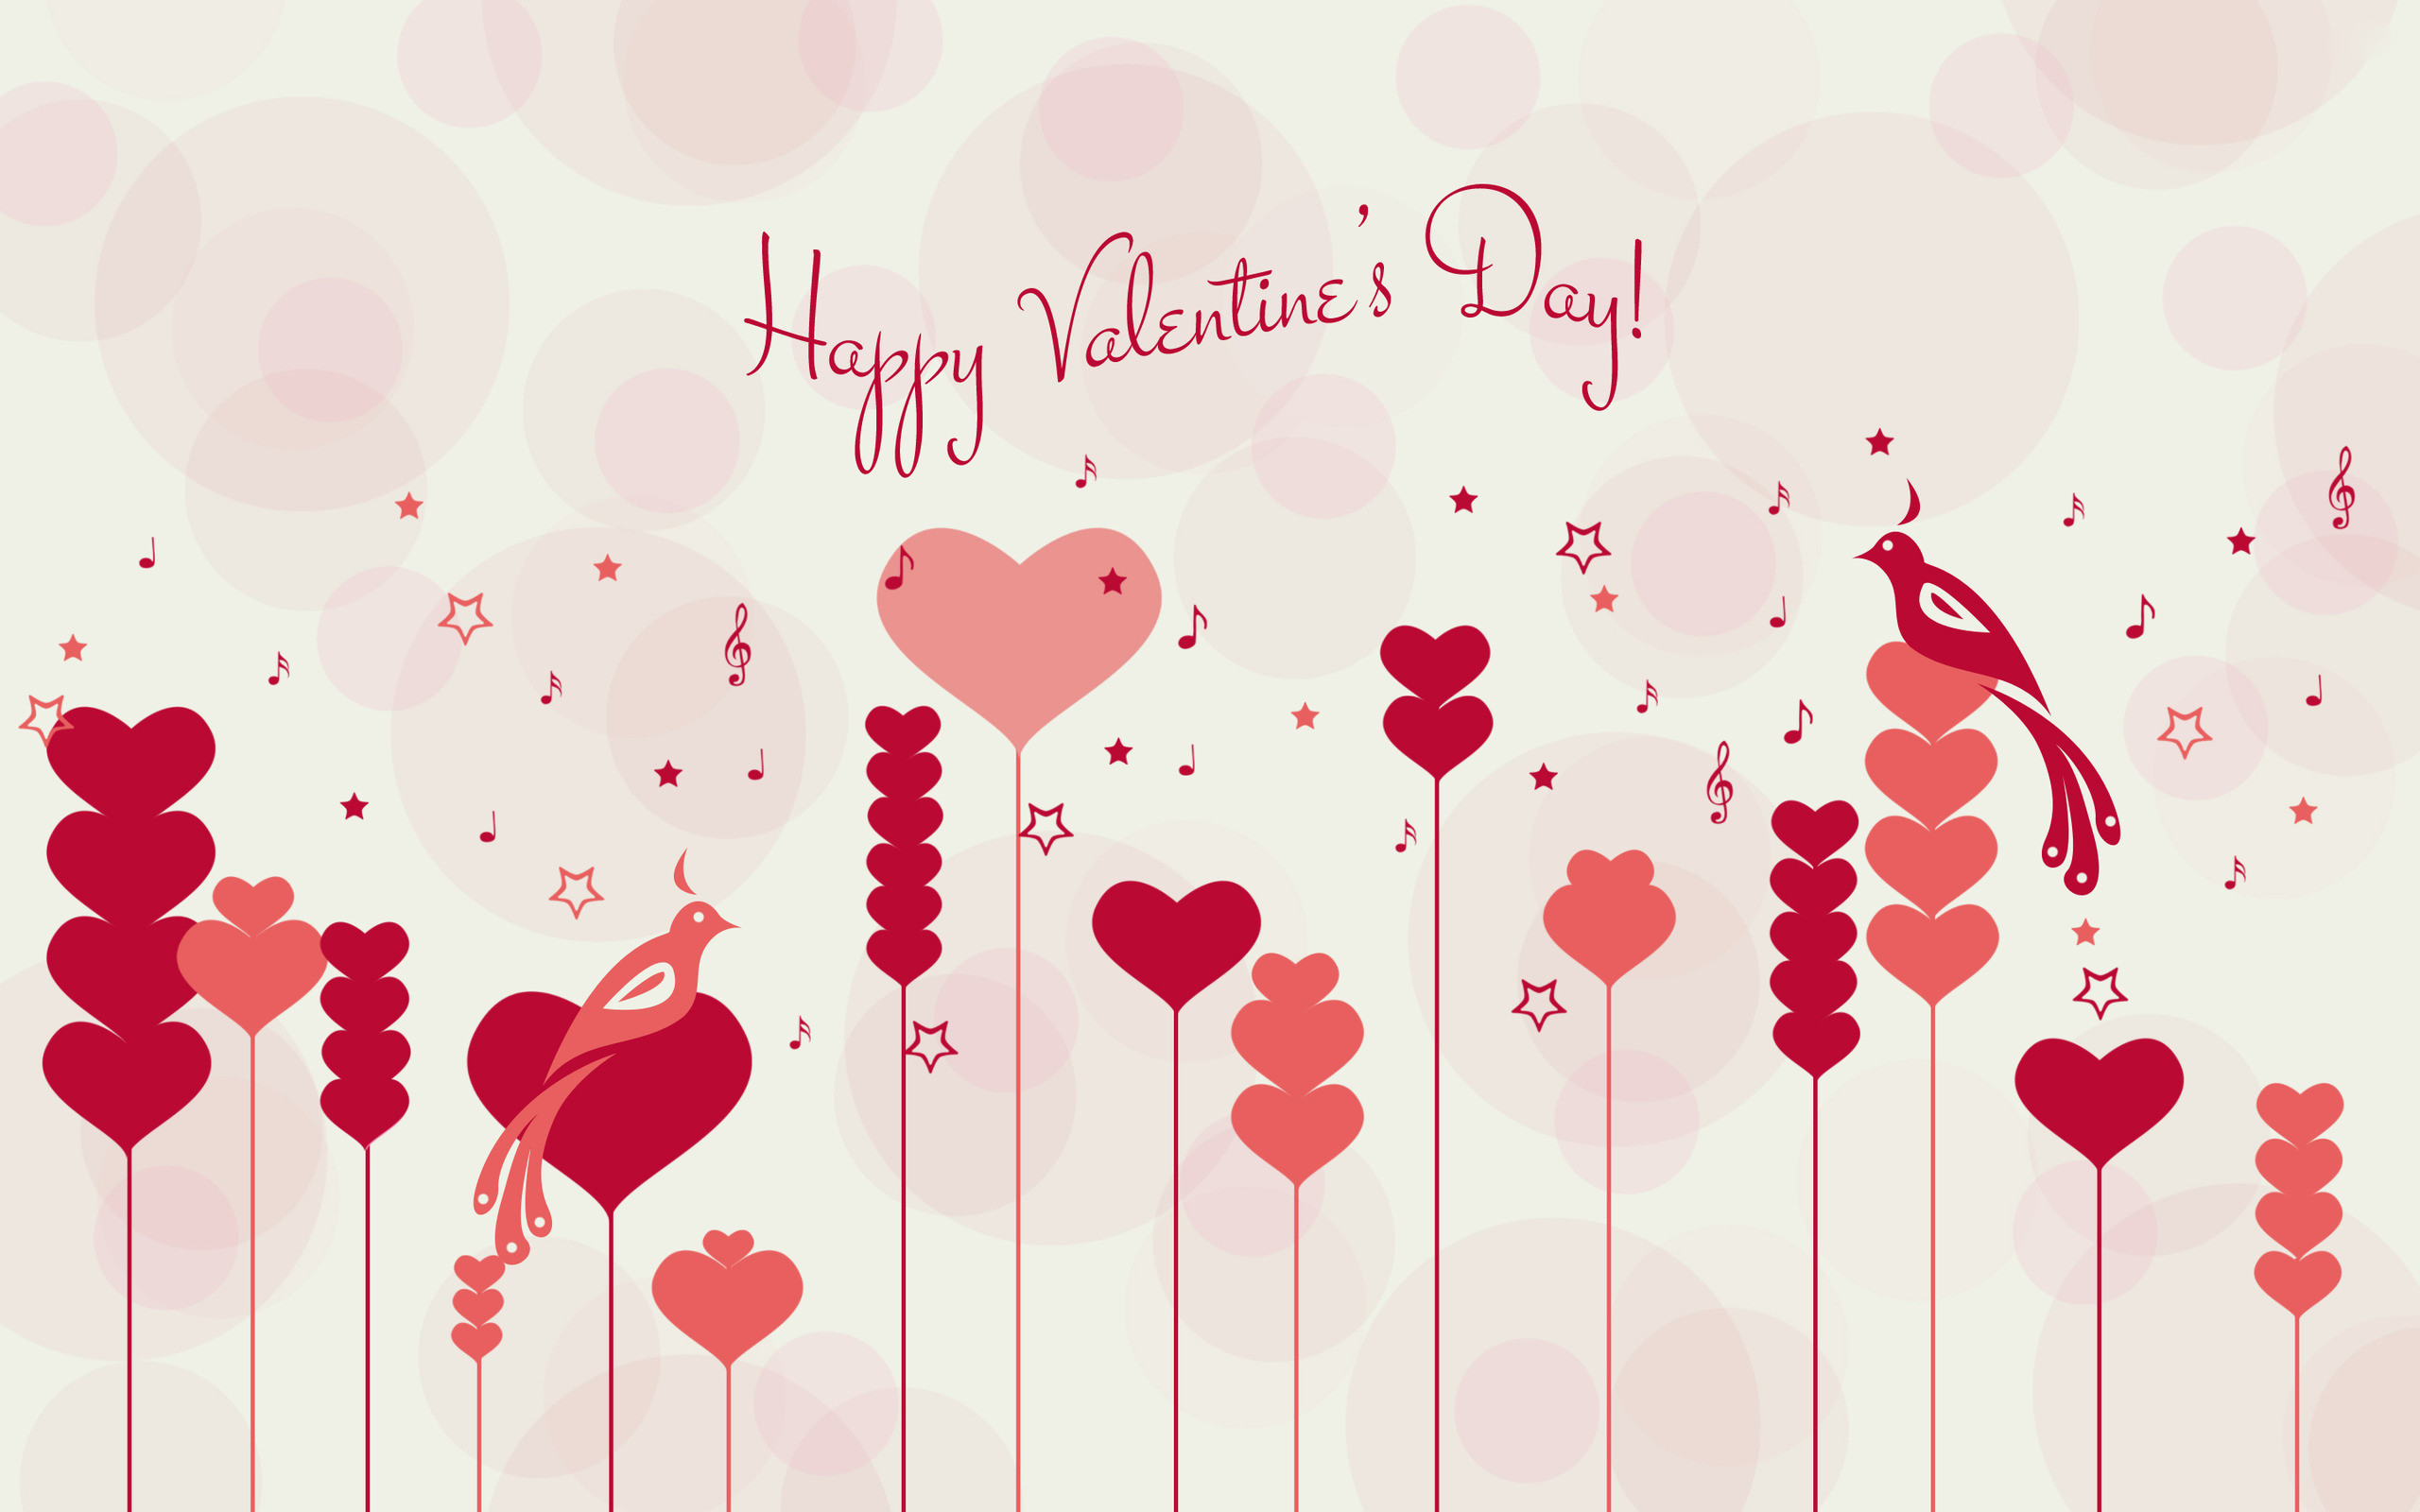 Free download Valentine Background and Wallpaper - [2560x1600] for your Desktop, Mobile & Tablet. Explore Free Valentine Wallpaper Mac. Free Valentine Wallpaper Mac, Free Valentine Wallpaper, Free Valentine Wallpaper